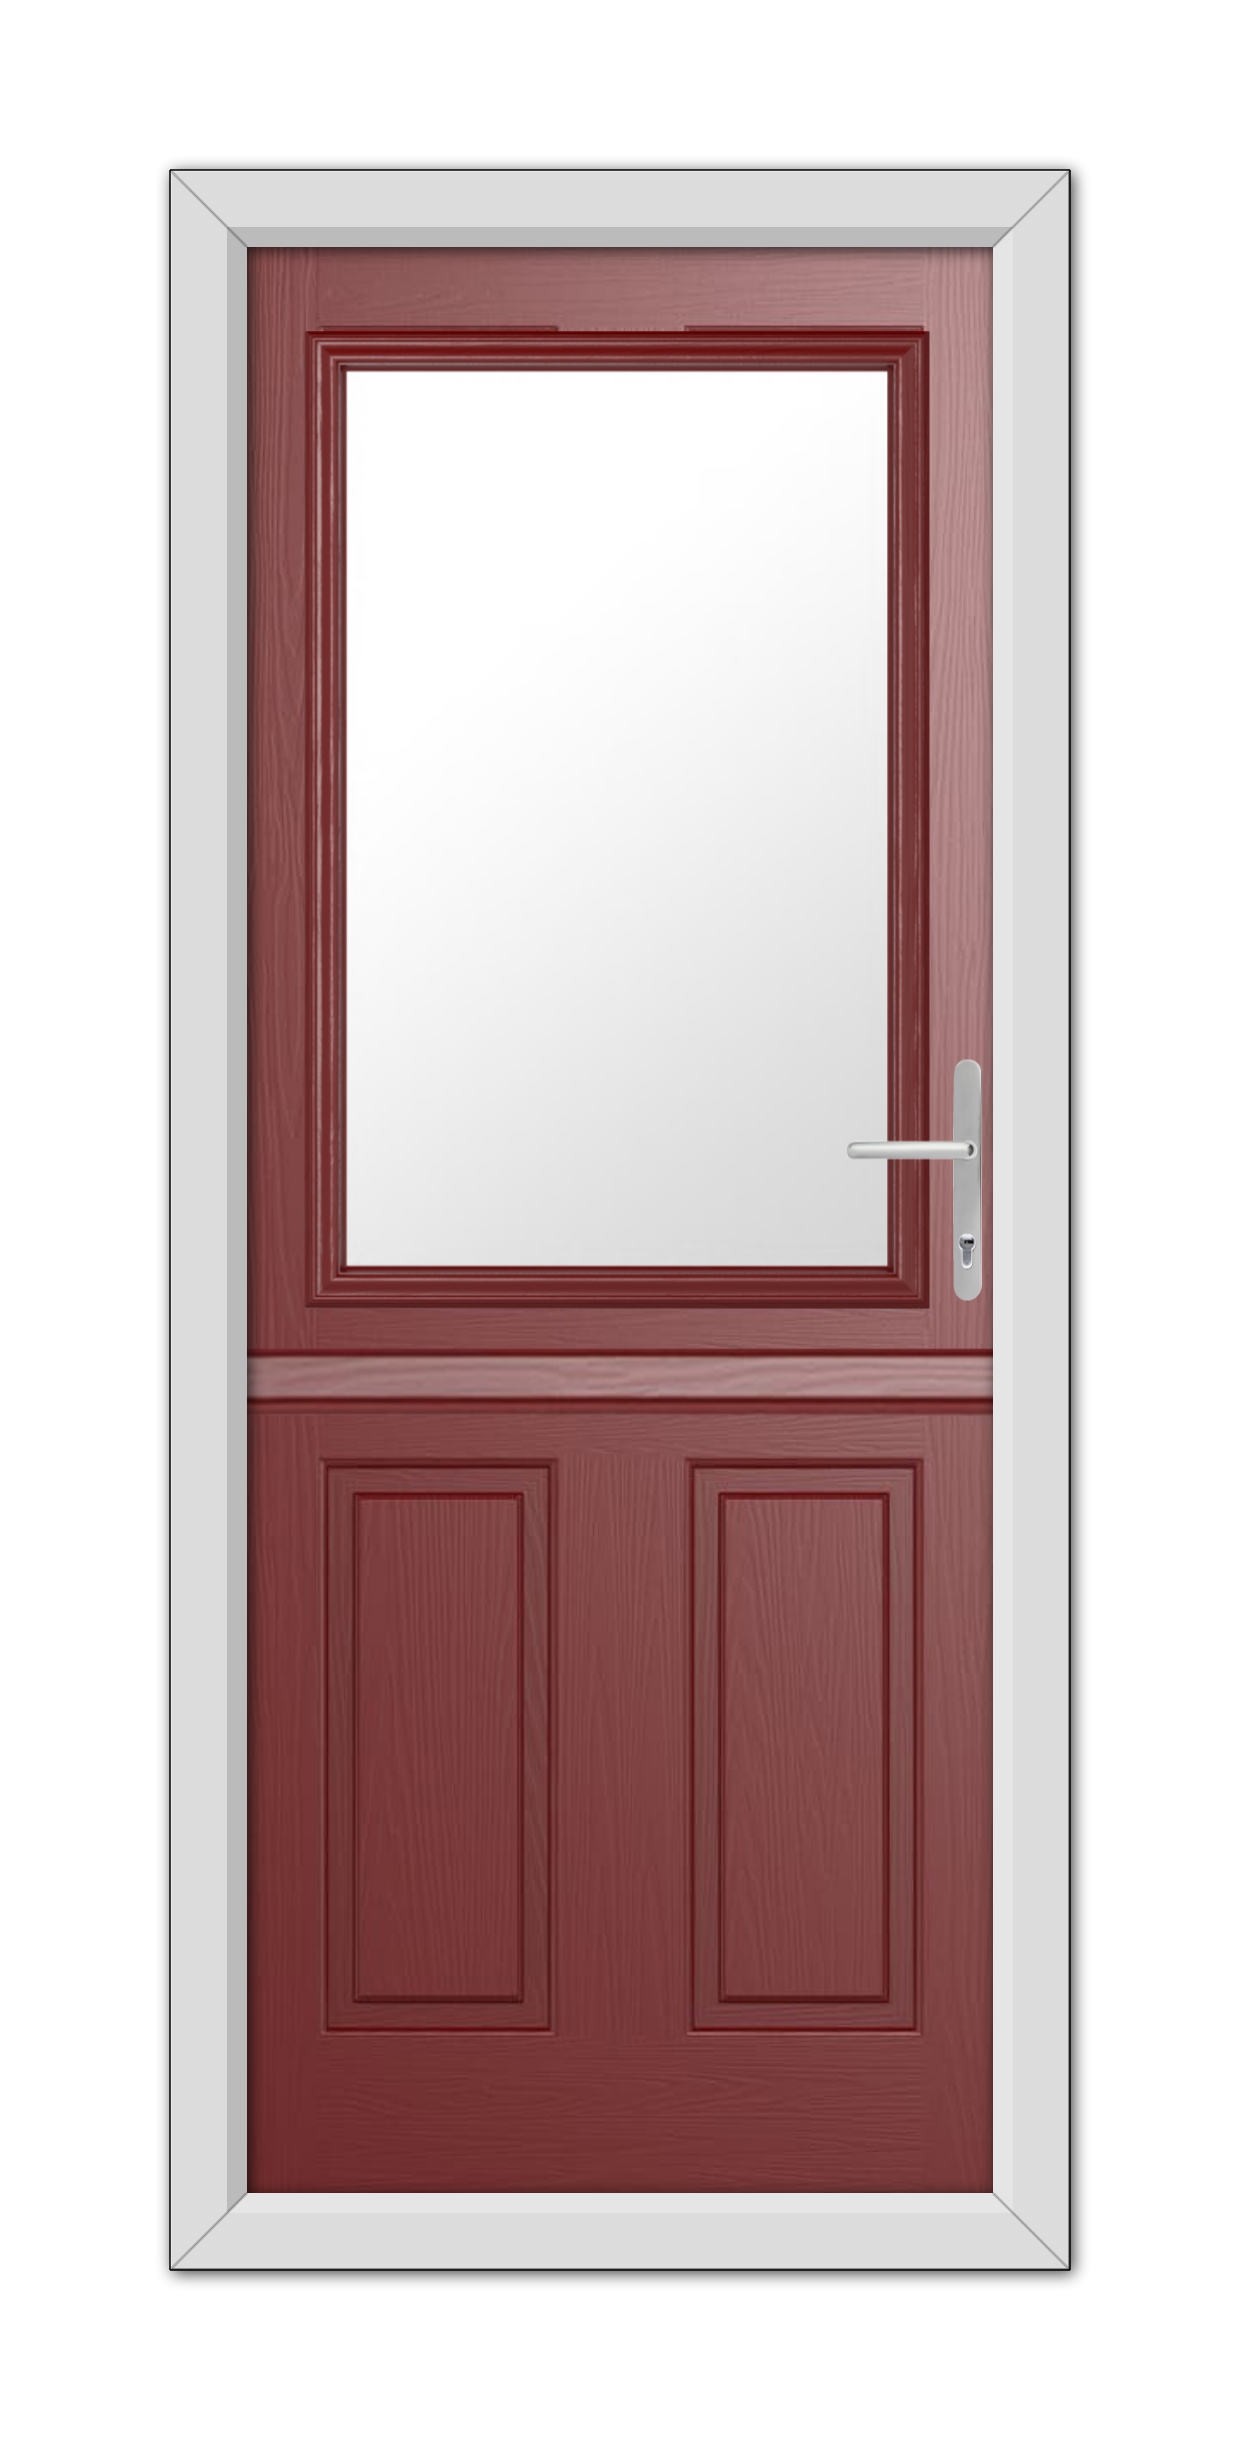 Red Buxton Stable Composite Door 48mm Timber Core with a large square window, white frame and handle, isolated on a white background.